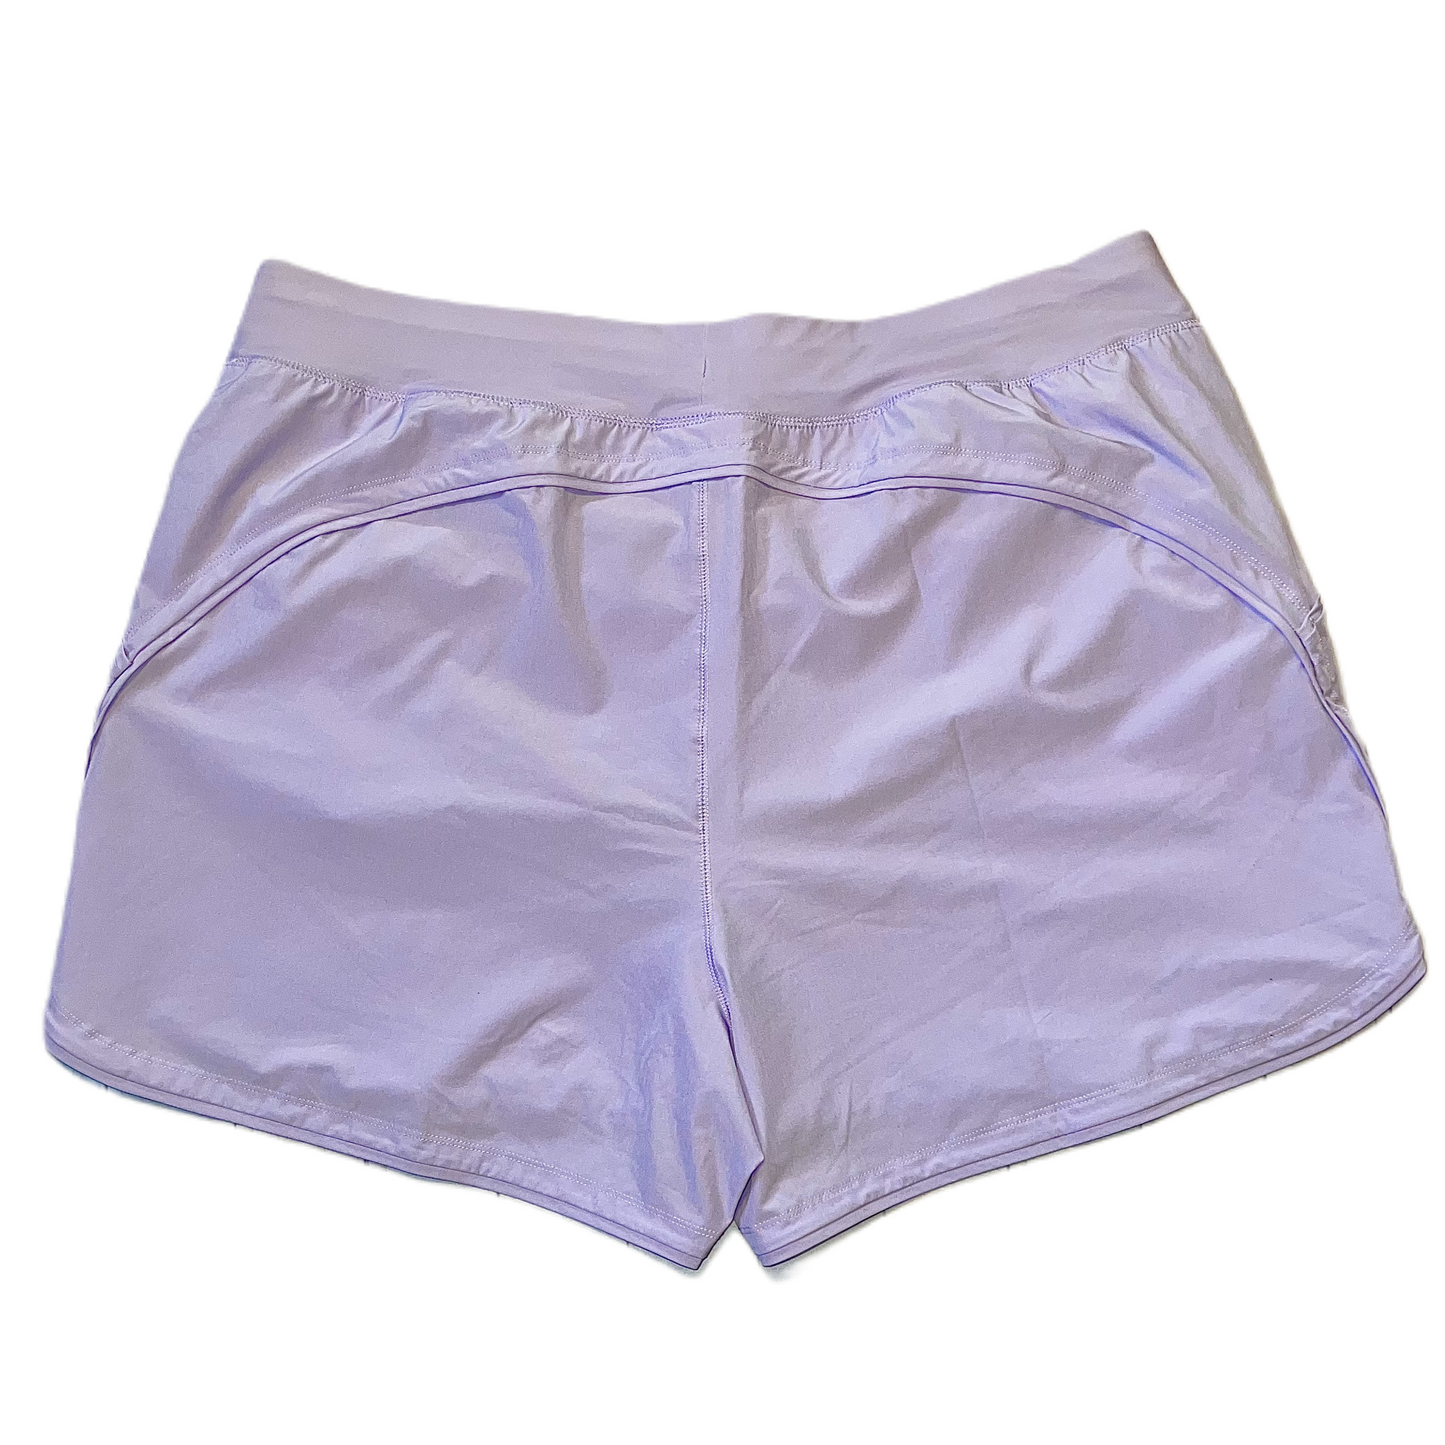 Lavender Athletic Shorts By Lands End, Size: 22w